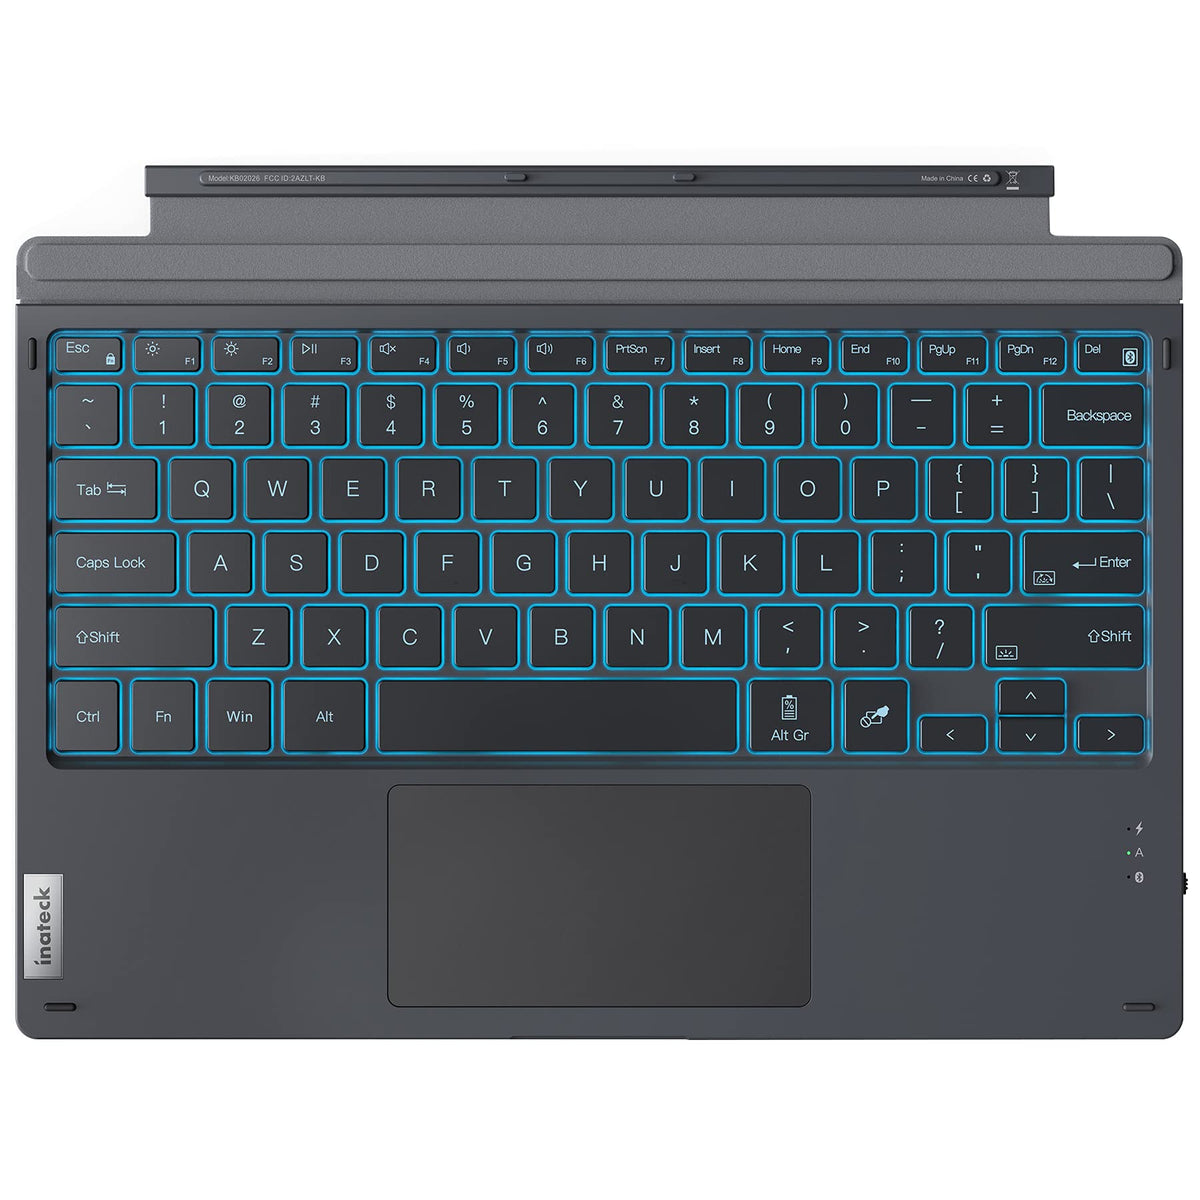 Inateck Surface Pro 7 Keyboard, Bluetooth 5.0, 7-Color Backlight, Compatible with Surface Pro 7/7+/6/5/4, KB02026 Gray